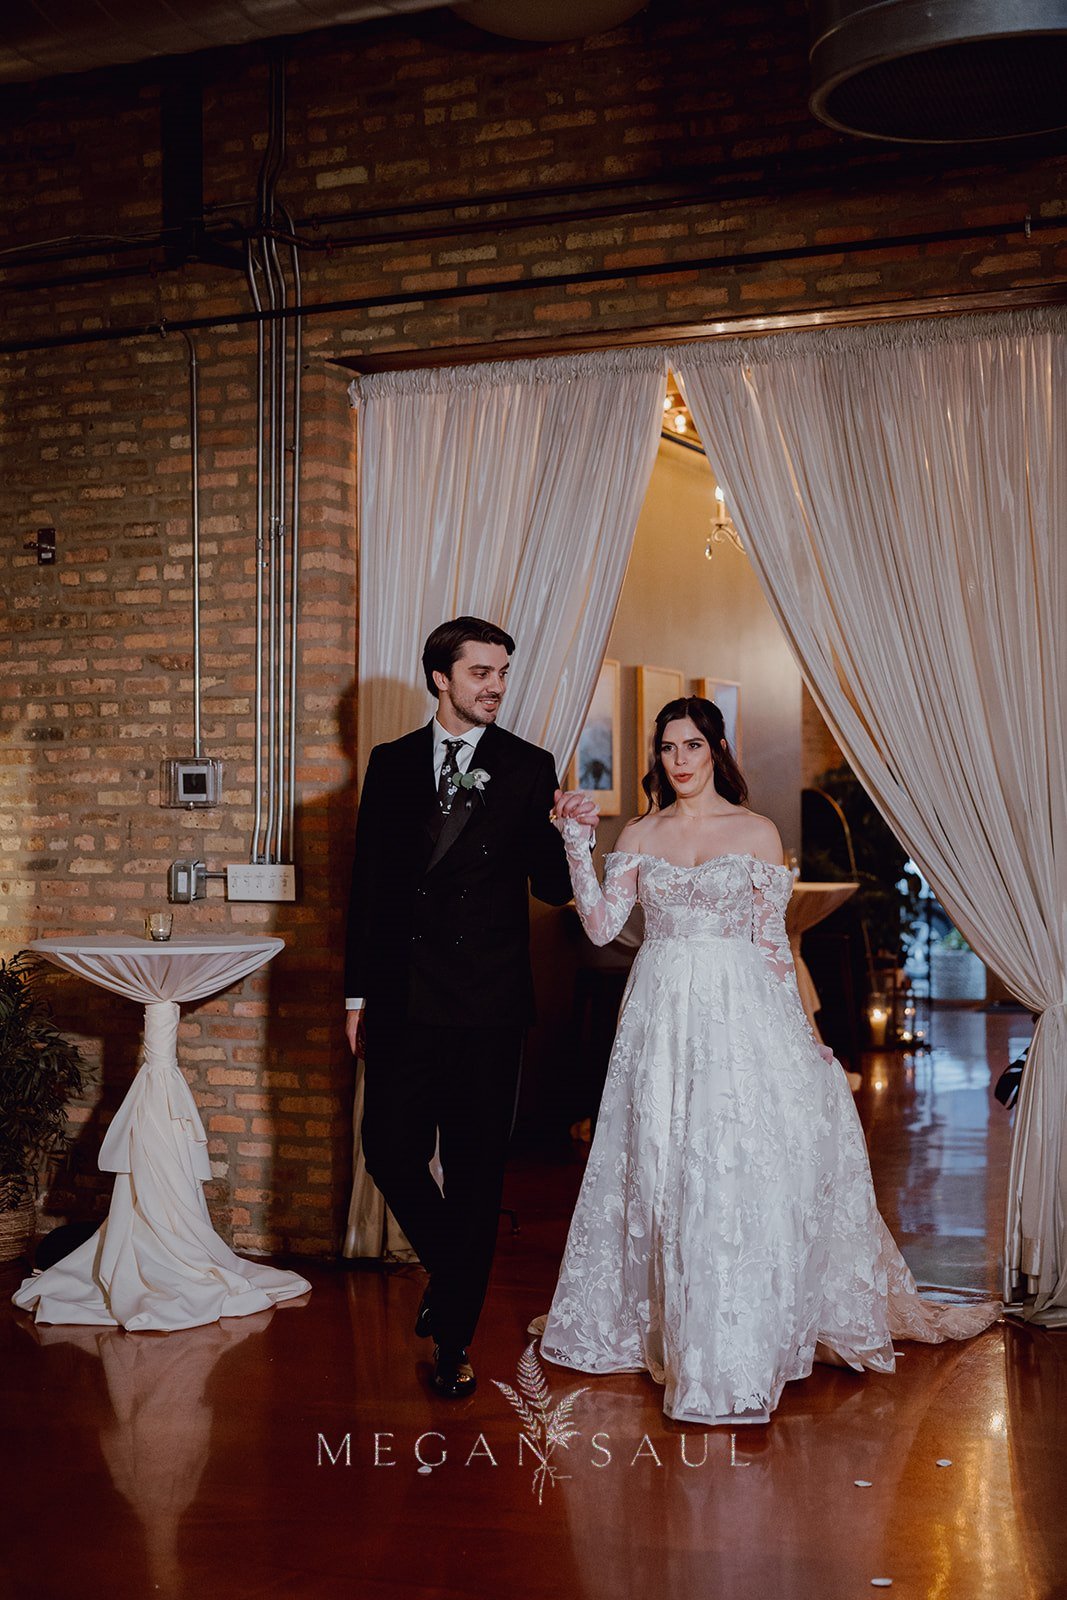 CHICAGO-WEDDING-PHOTOGRAPHY-BY-ARTISTS-AND-STORIES-BY-MEGAN-SAUL-RECEPTION (4 of 211)_websize.jpg